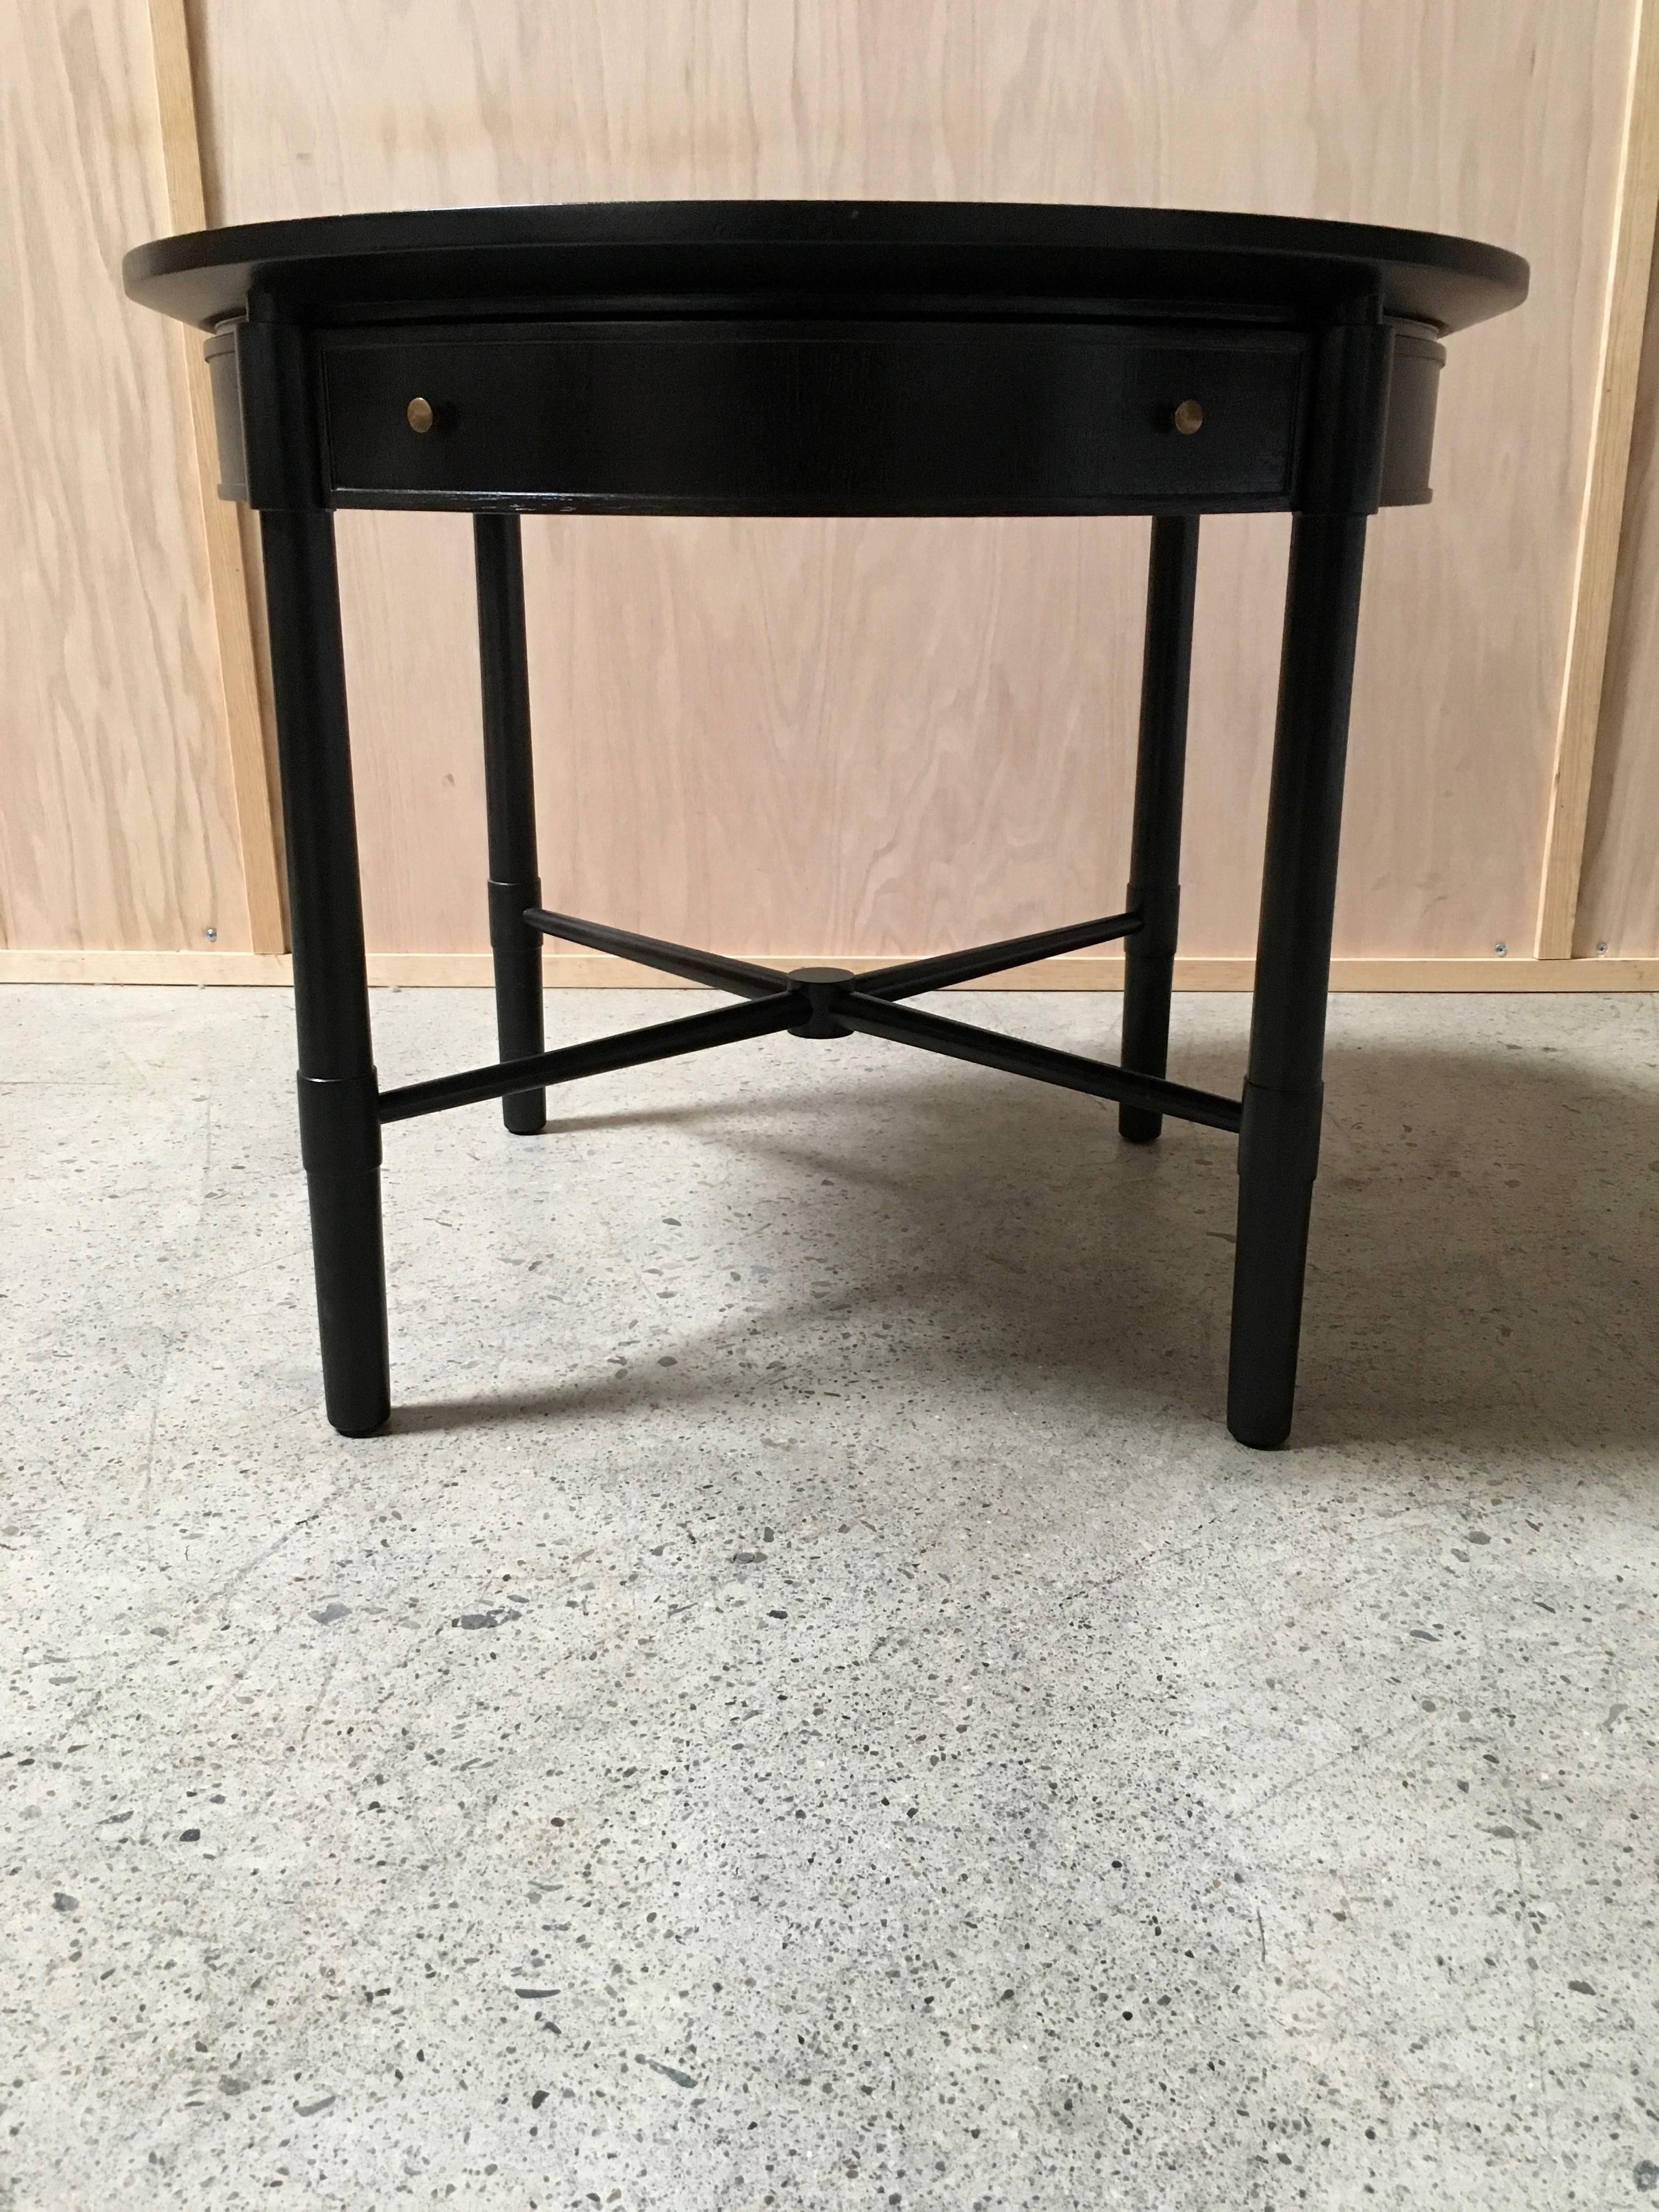 Ebonized side table by Johnson Furniture Company with X-base.